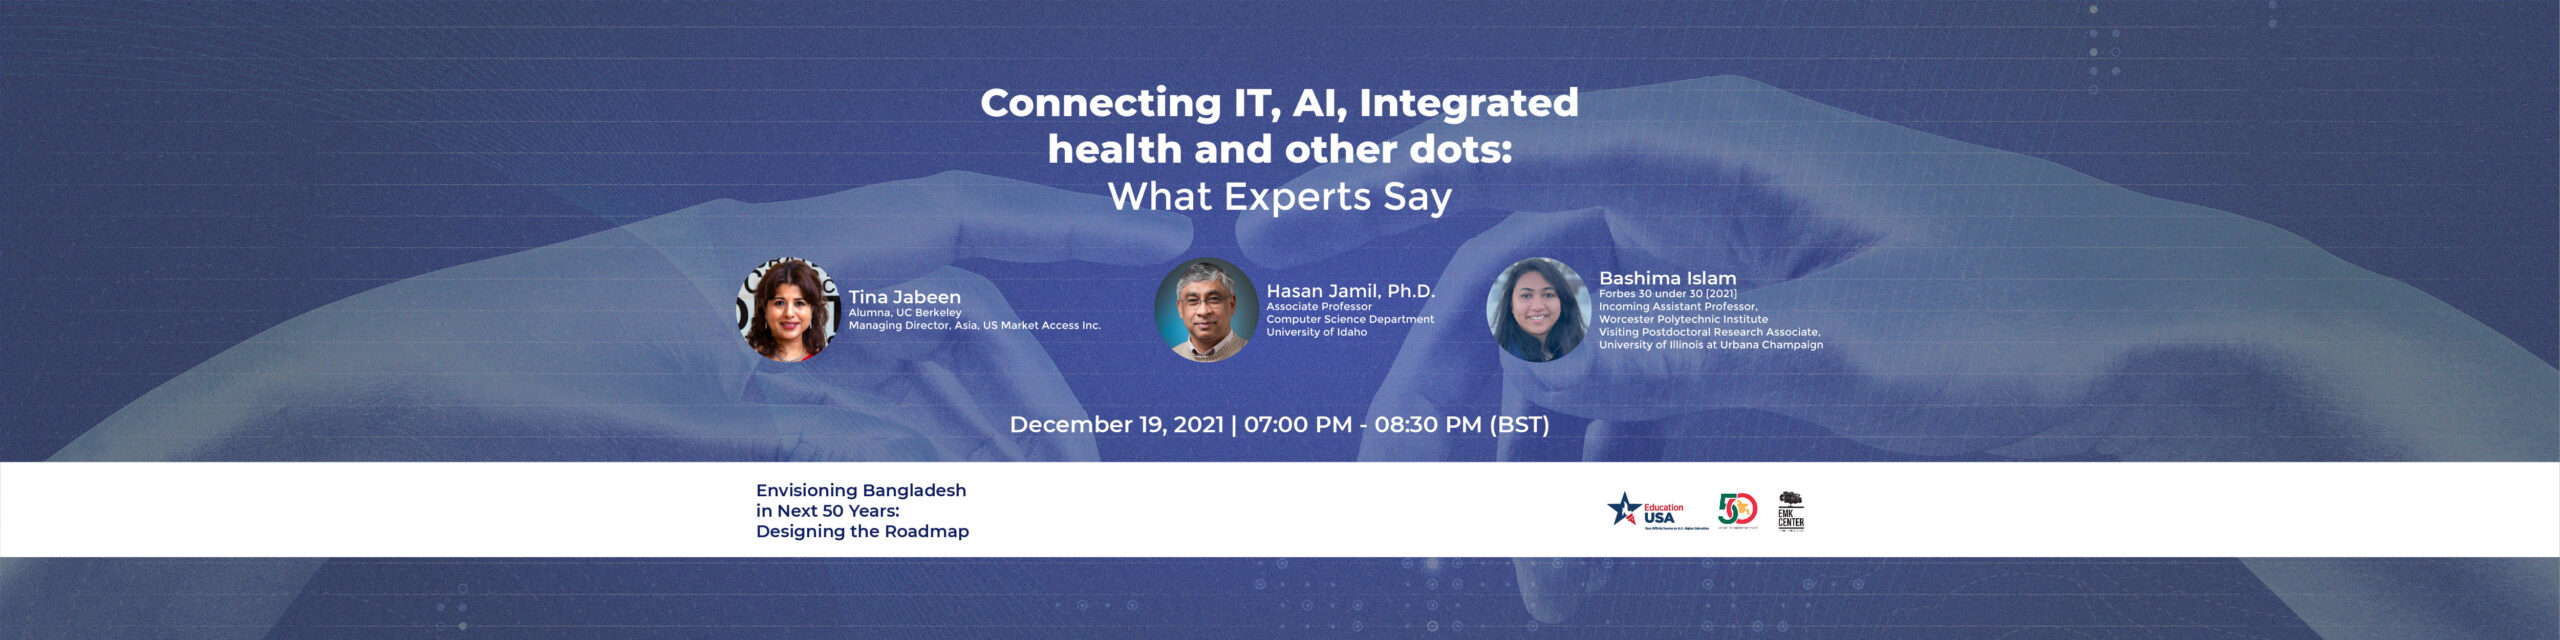 Connecting IT, AI, Integrated health and other dots